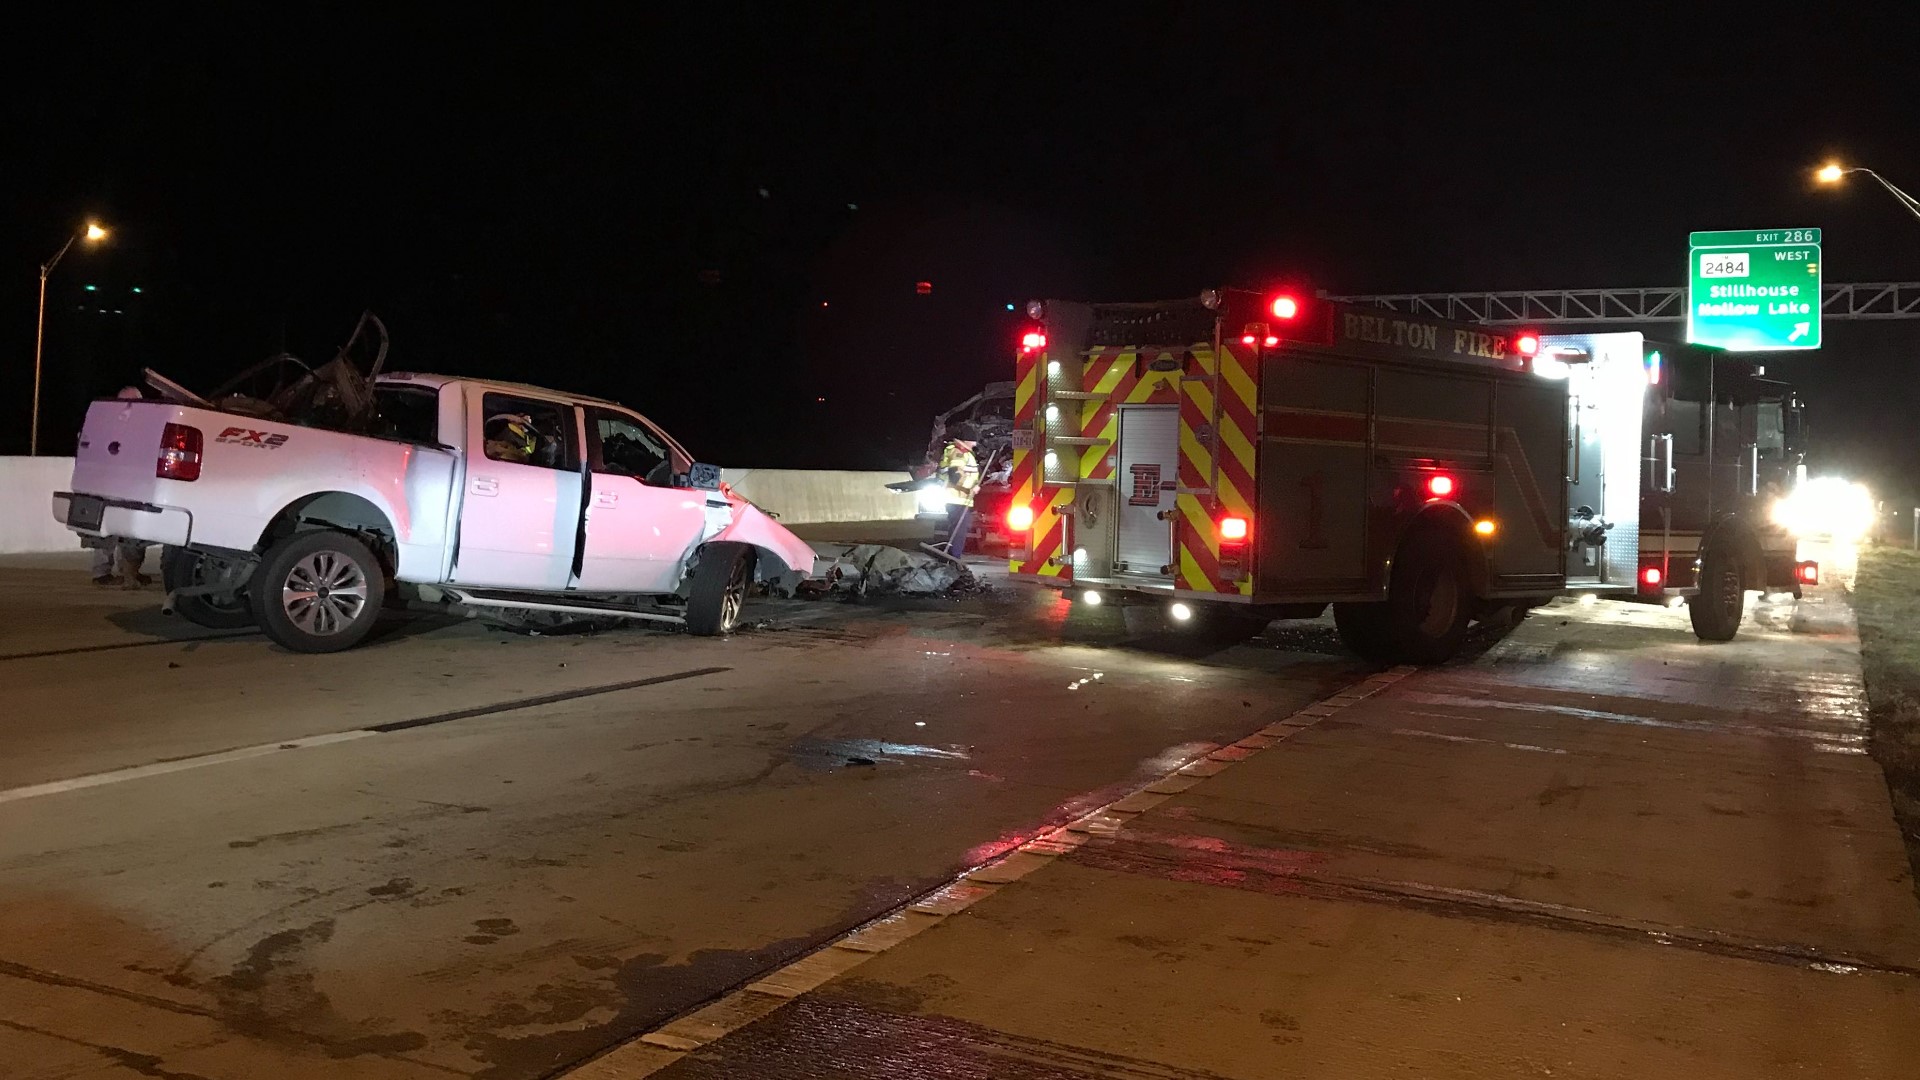 One driver died and another is hospitalized Tuesday after a wrong-way driver crashed head on into another car on the southbound lanes of Interstate 35 at Exit 286 near Salado. The crash remains under investigation.